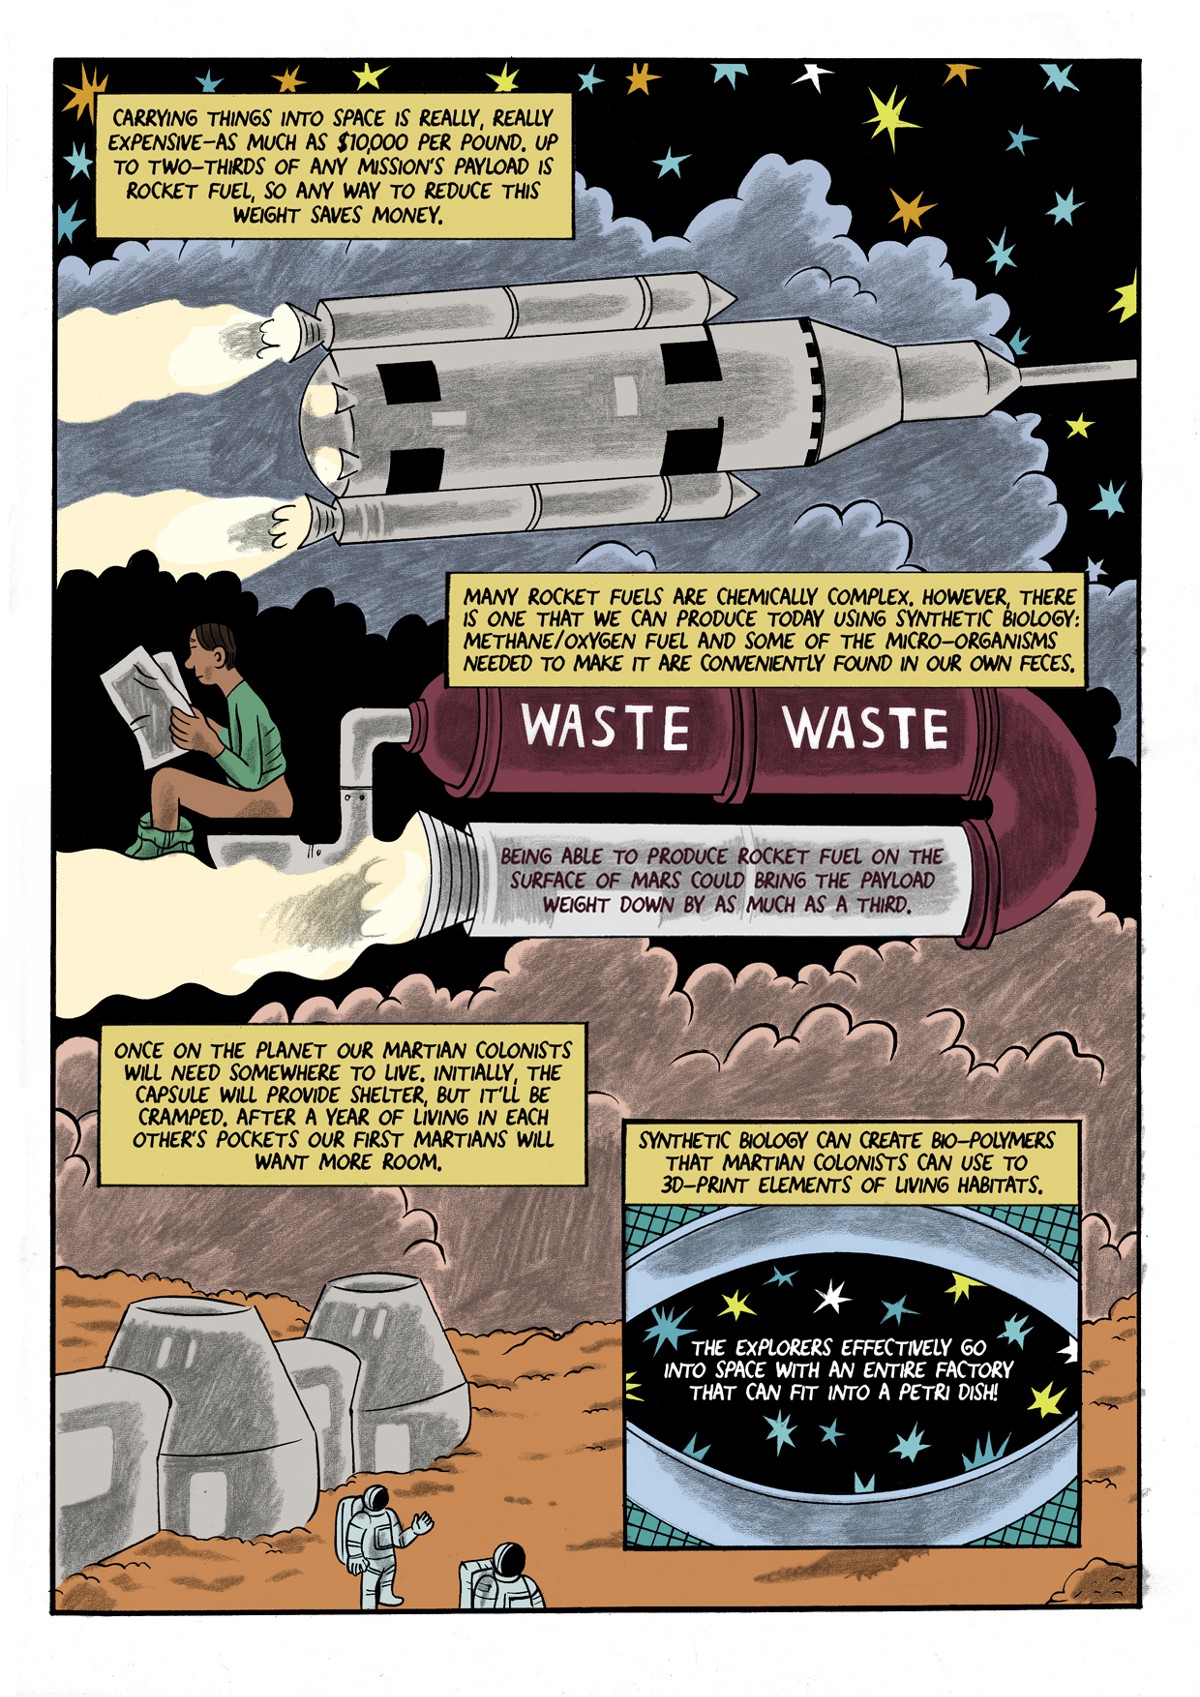 The comic continues:
Panel 6 (a rocket launches): Carrying things into space is really, really expensive–as much as $10,000 per pound. Up to two-thirds of any mission's payload is rocket fuel, so any way to reduce this weight saves money.
Panel 7 (a person sits on a toilet, the toilet is connected to a rocket fuel tank): Many rocket fuels are chemically complex, however, there is one that we can produce today using synthetic biology. Methan/Oxygen fuel and some of the micro-organisms needed to make it are conveniently found in our own faeces. Being able to produce rocket fuel on the surface of Mars could bring the payload weight down by as much as a third.
Panel 8 (a base on the surface of Mars): Once on the planet our Martian colonists will need somewhere to live. Initially the capsule will provide shelter, but it'll be cramped. After a year of living in each other's pockets our first Martians will want more room.
Panel 9 (a starry sky inside a petri dish): Synthetic biology can create bio-polymers that Martian colonists can use to 3D-print elements of living habitats. The explorers effectively go into space with an entire factory that can fit into a petri dish!
The comic ends.